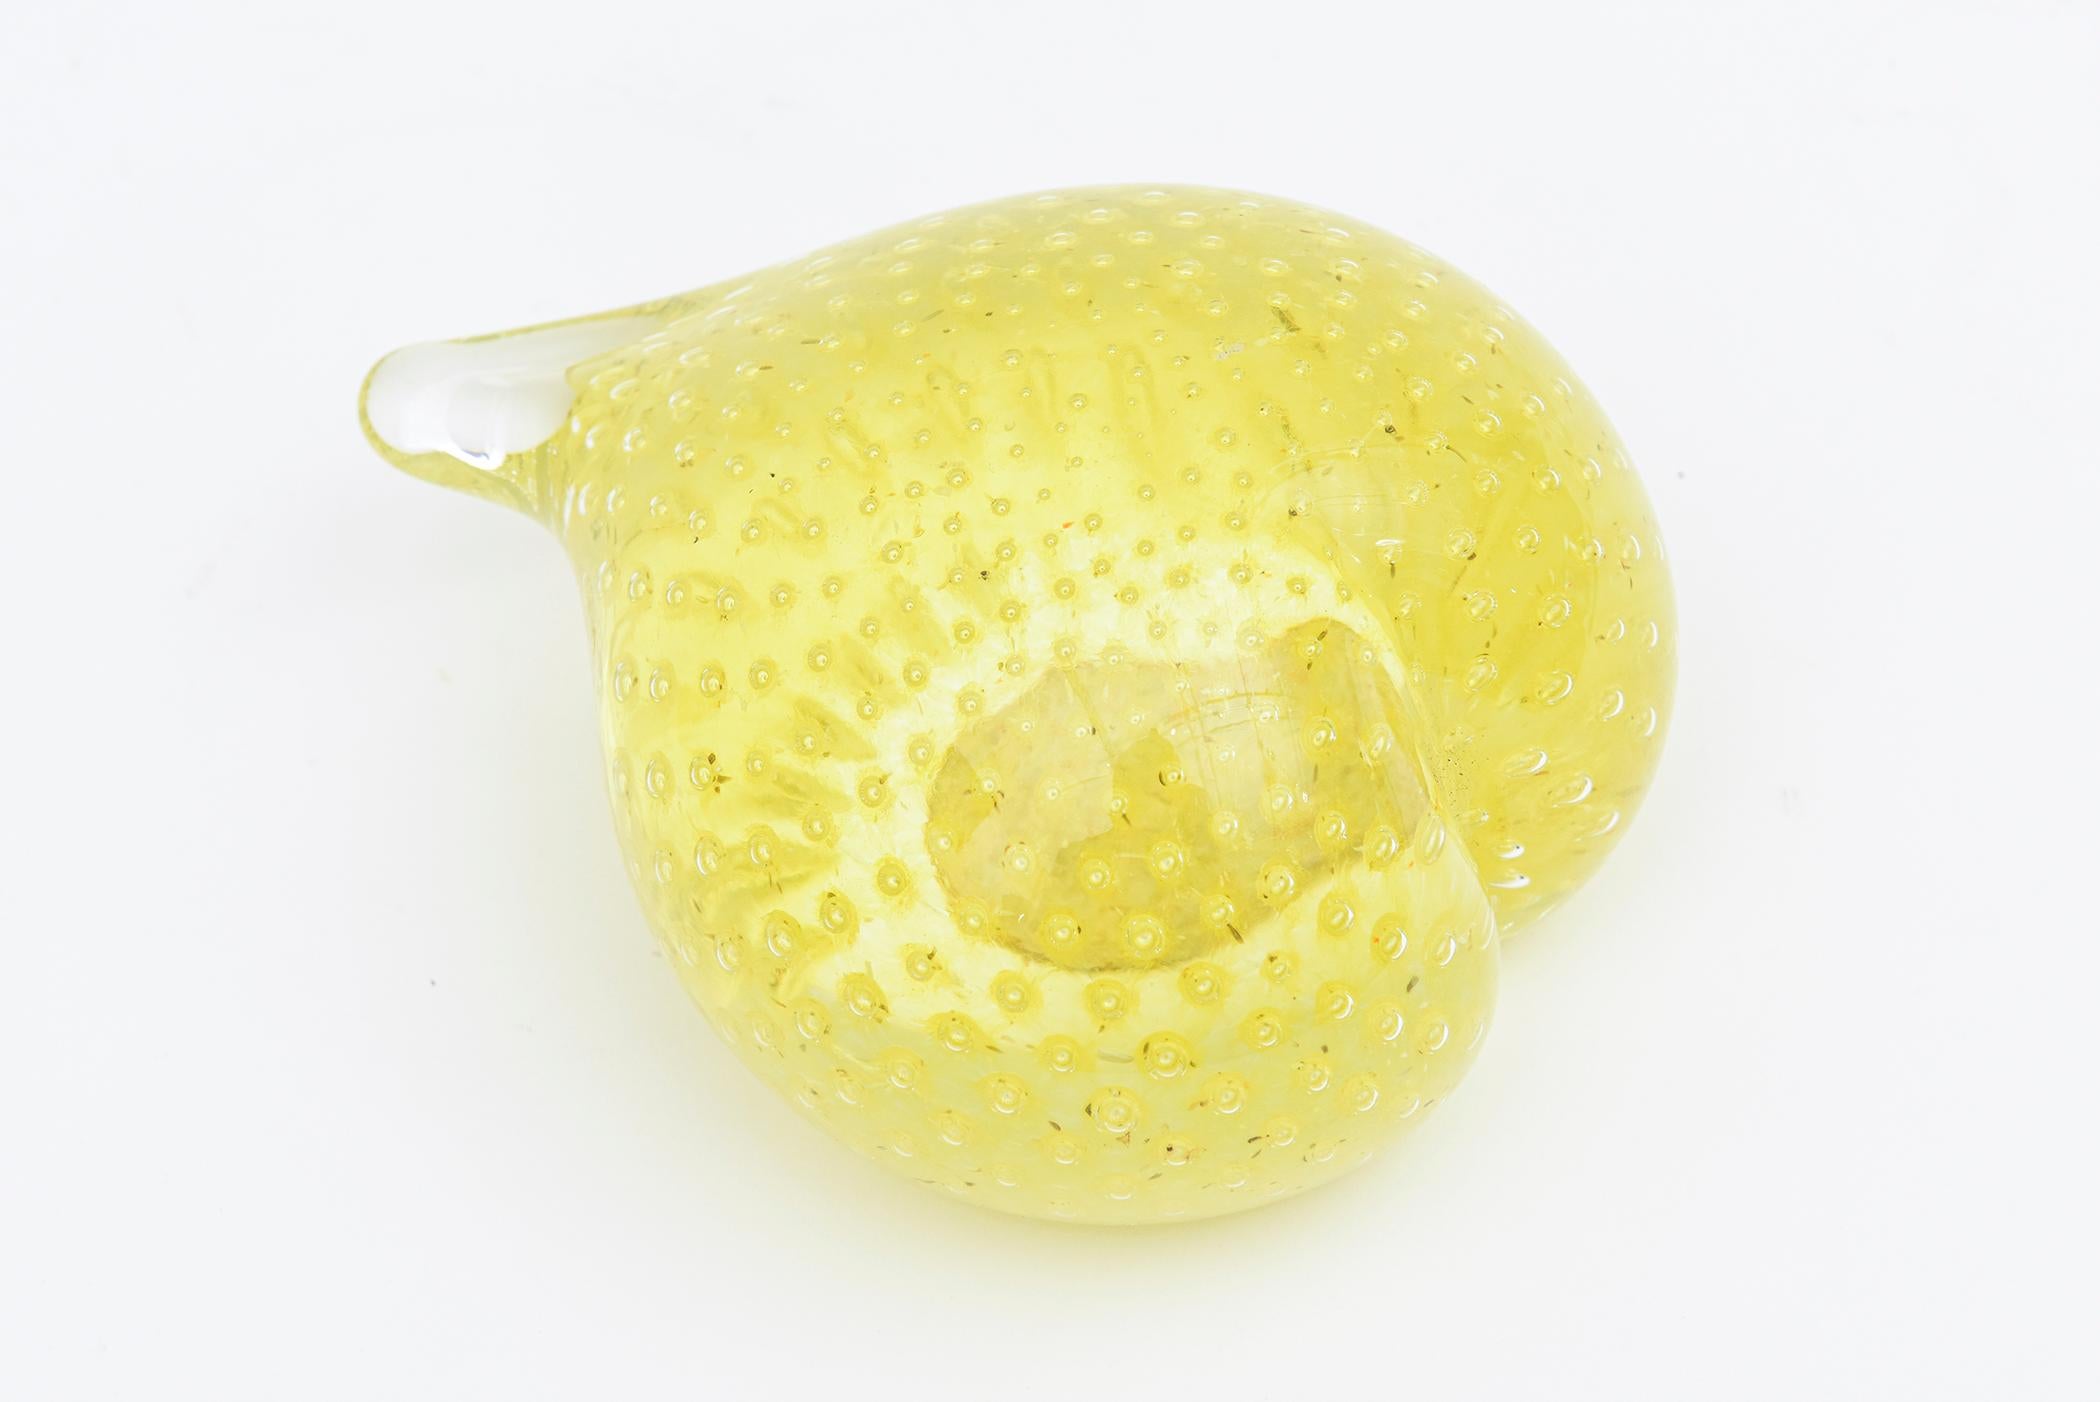 Blown Glass Murano Vintage Yellow Heart Glass With Bubbles Paperweight Desk Accessory For Sale